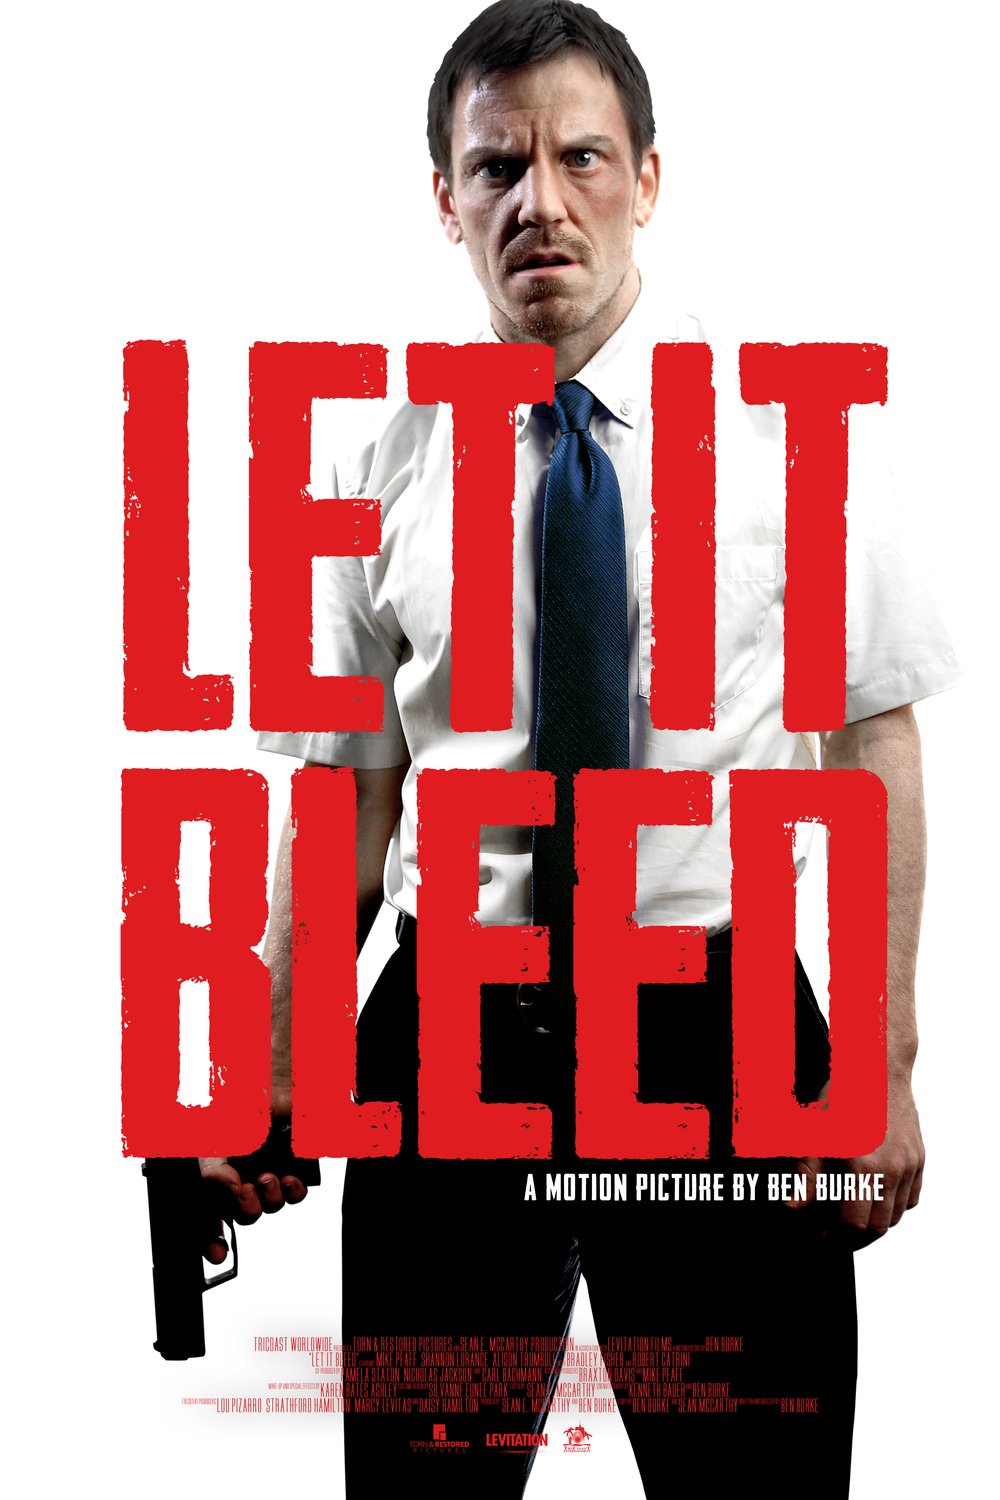 Poster of the movie Let It Bleed